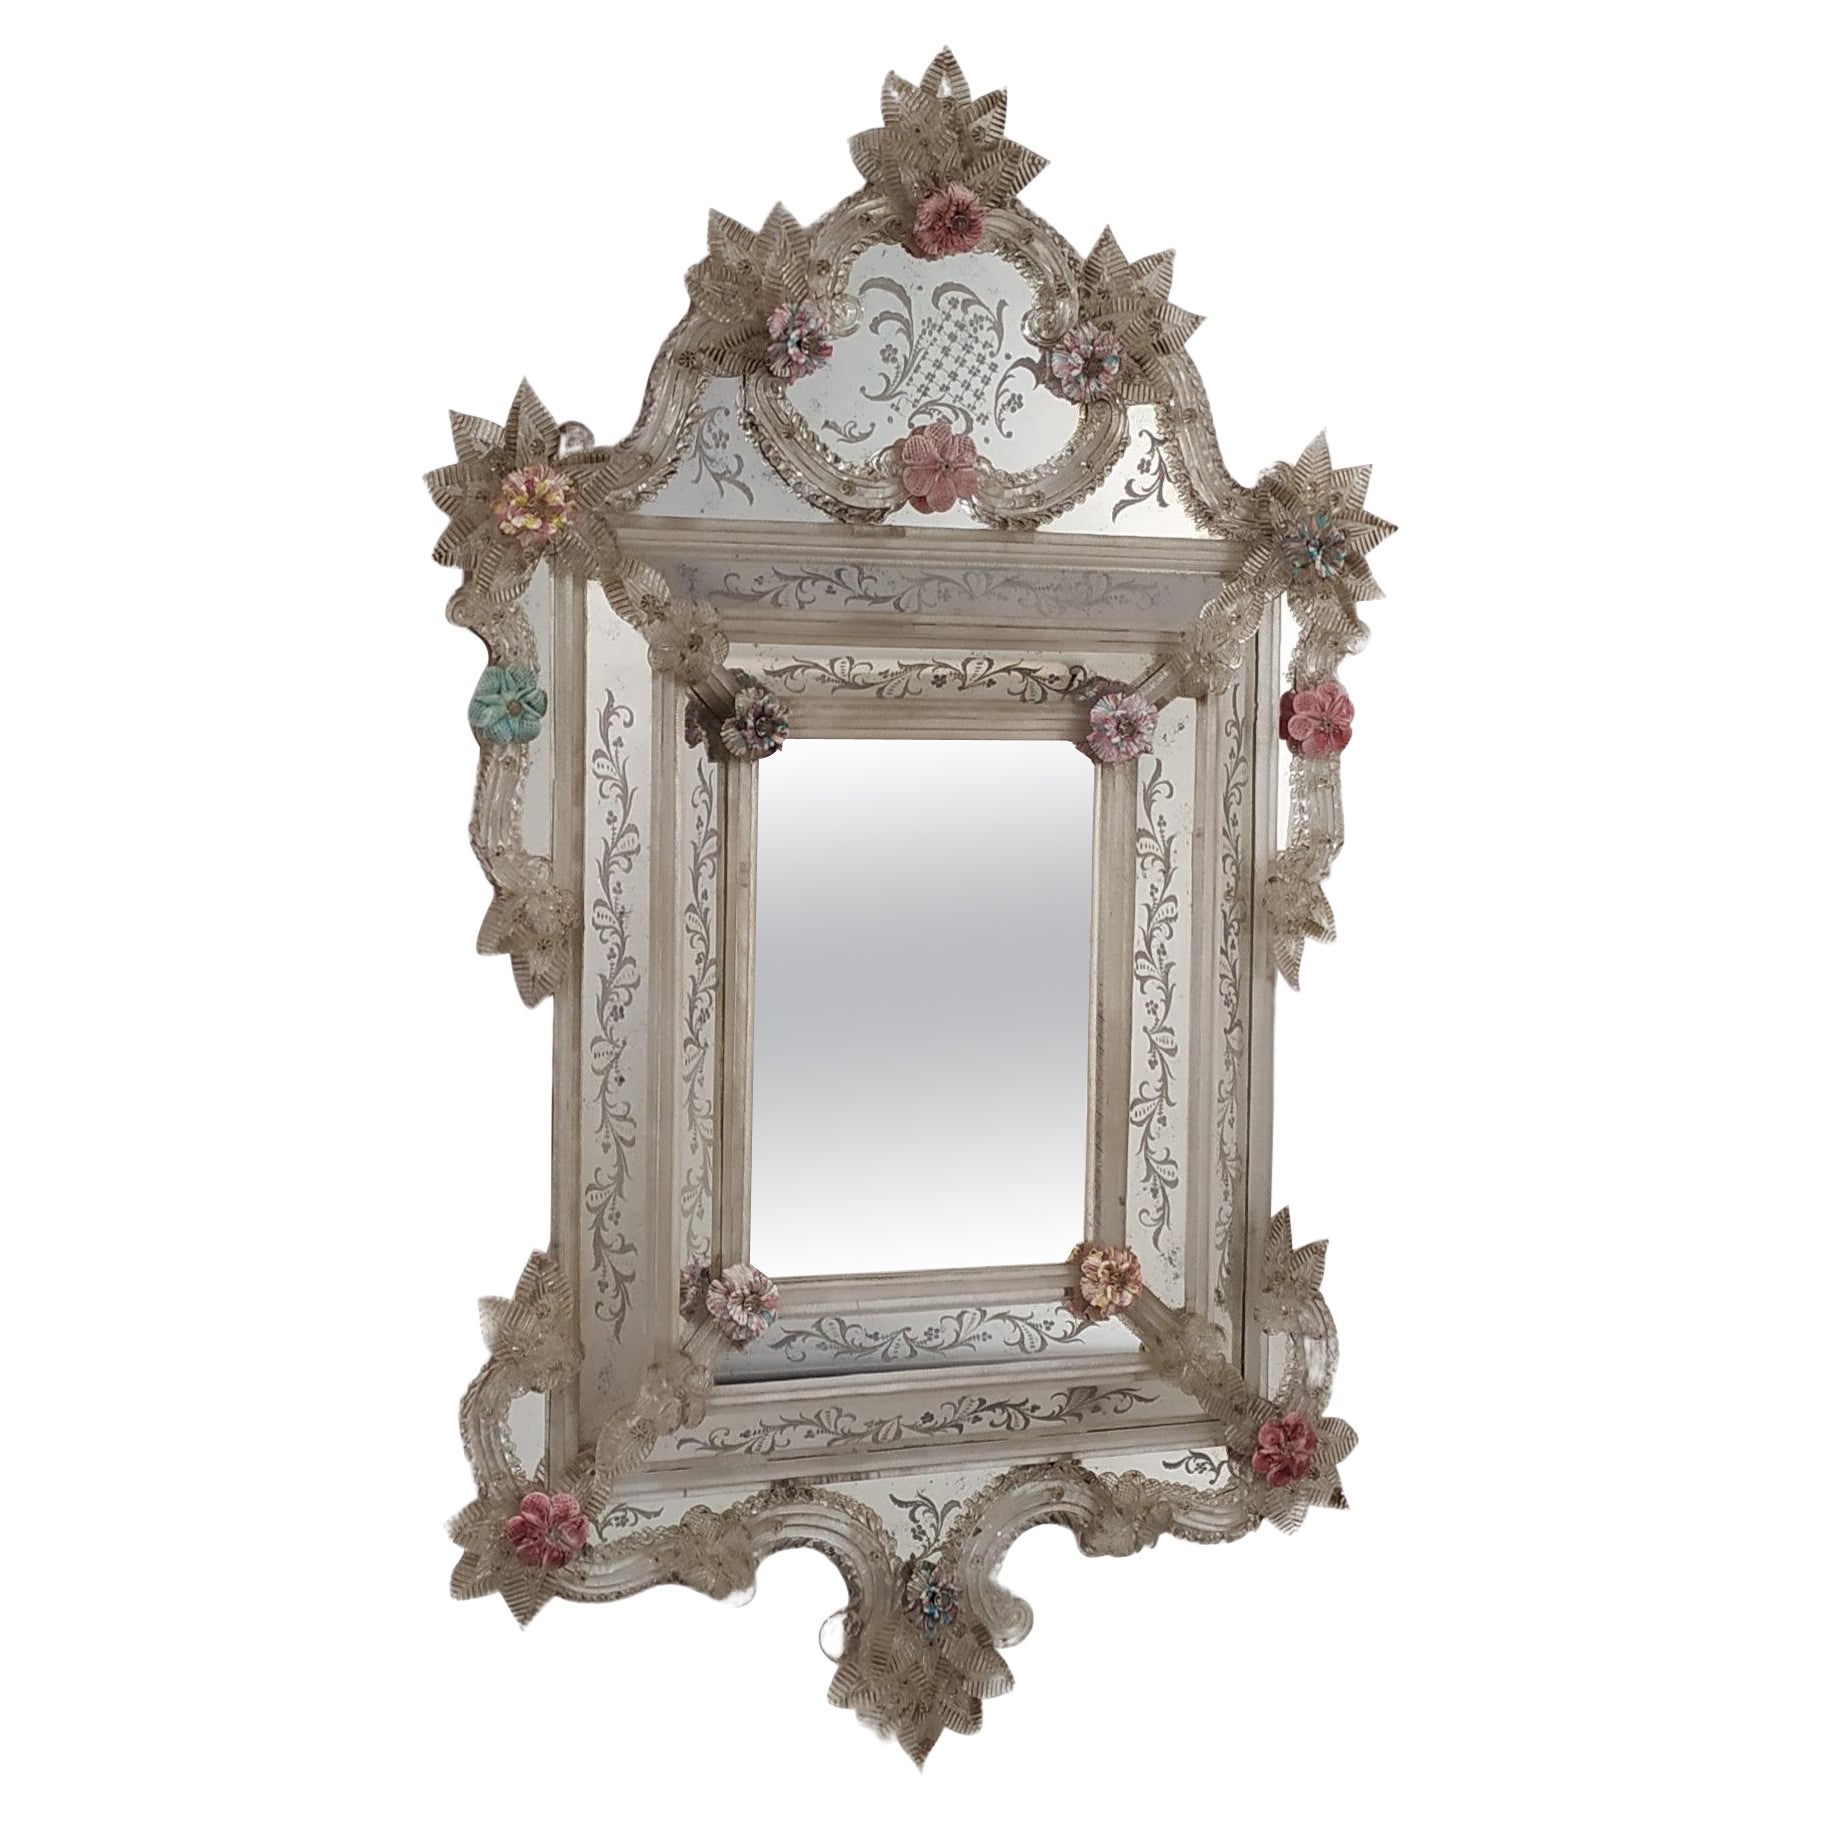  "Laguna" Reproduction of Antique Venetian Mirror by Fratelli Tosi Murano For Sale